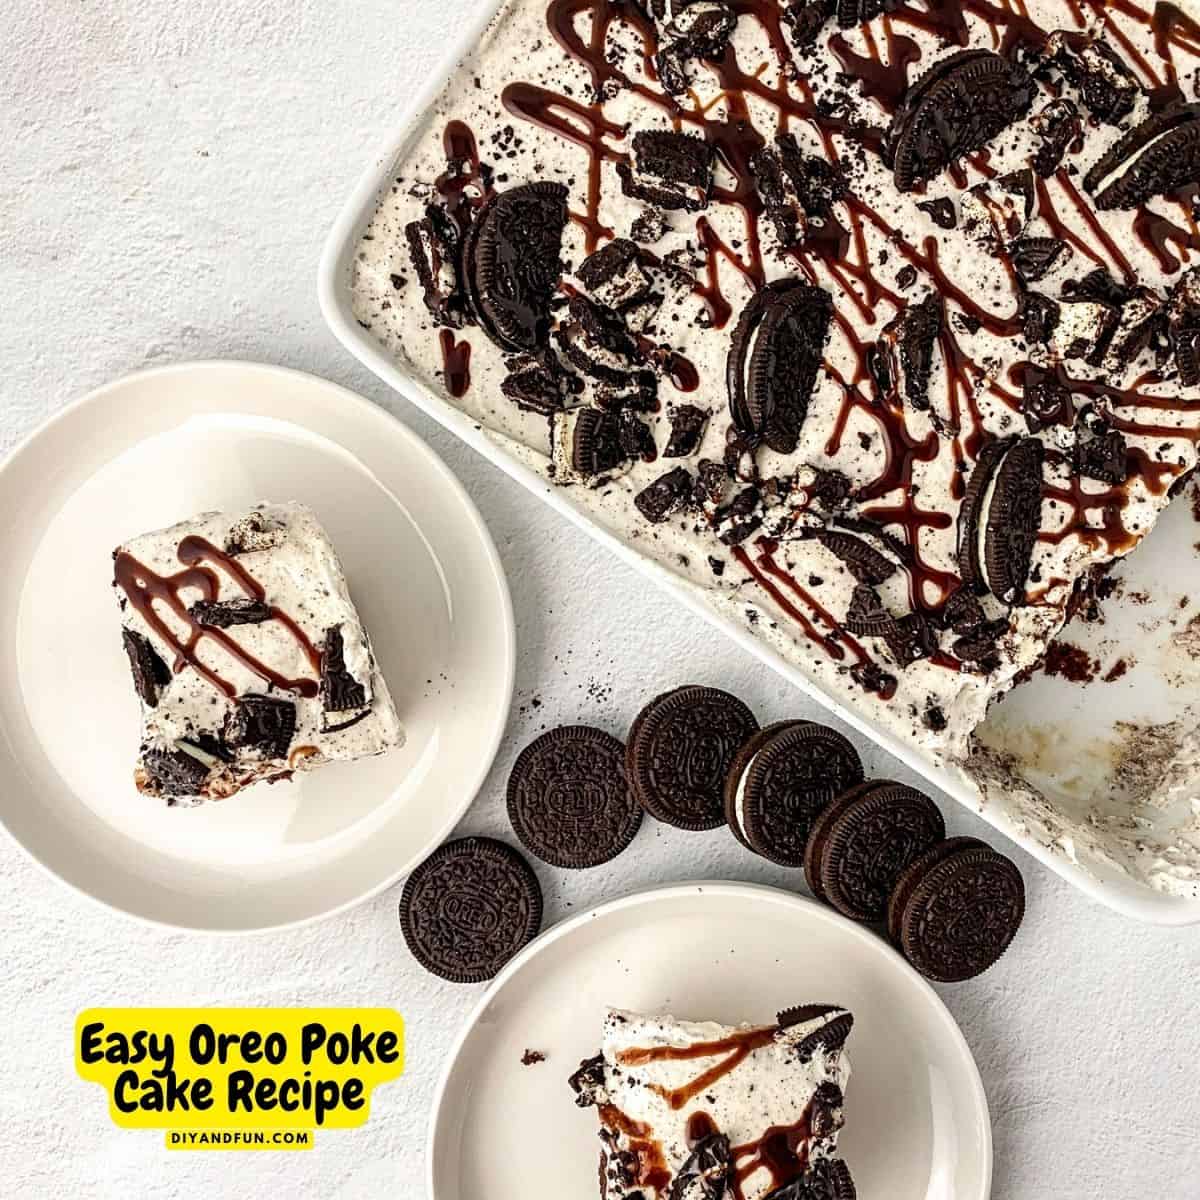 Easy Oreo Poke Cake Recipe, a delicious and moist cake recipe idea using cake mix, instant pudding, and whipped topping.